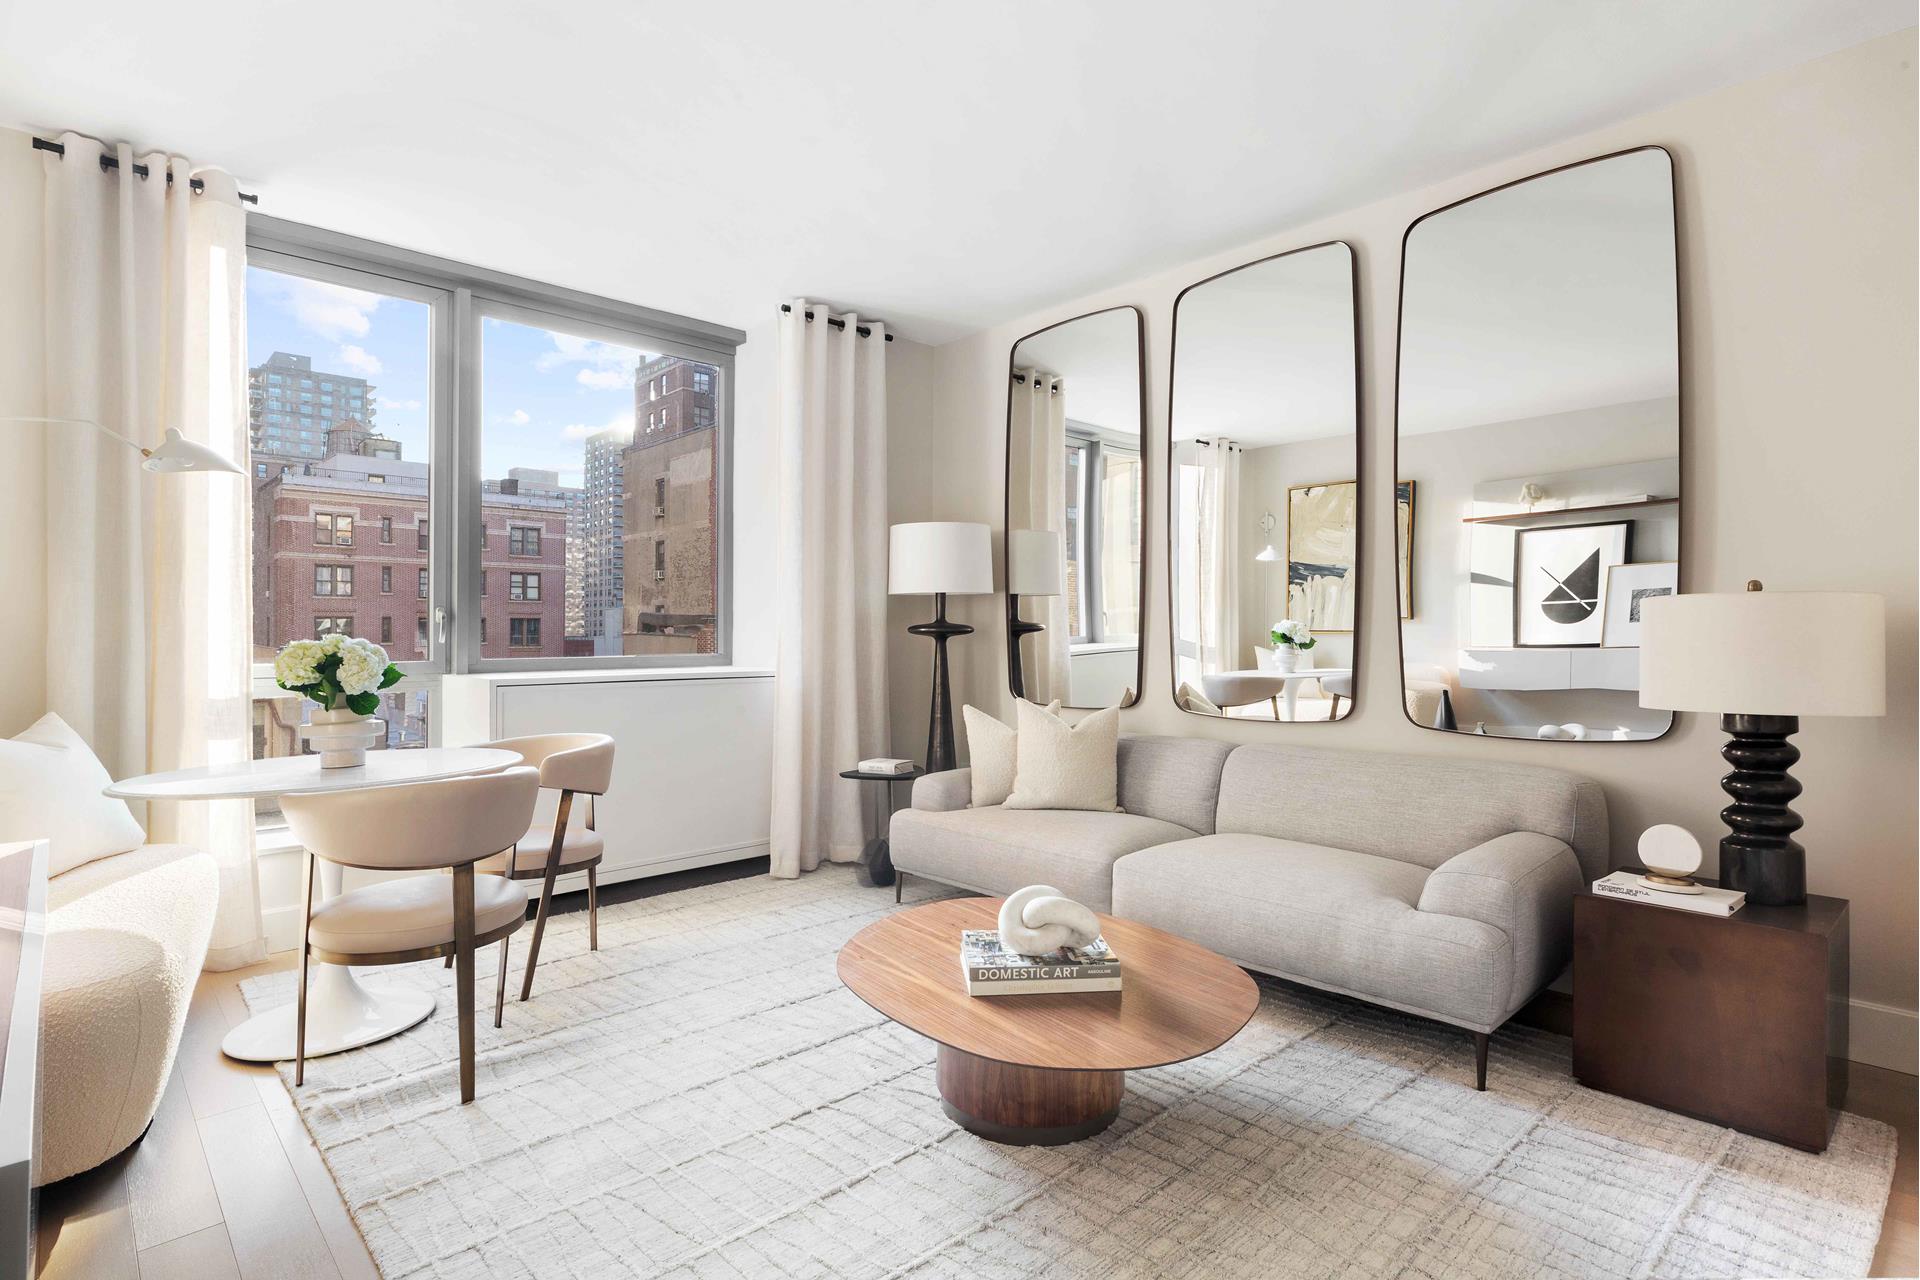 212 West 72nd Street 14A, Lincoln Sq, Upper West Side, NYC - 2 Bedrooms  
2 Bathrooms  
4 Rooms - 